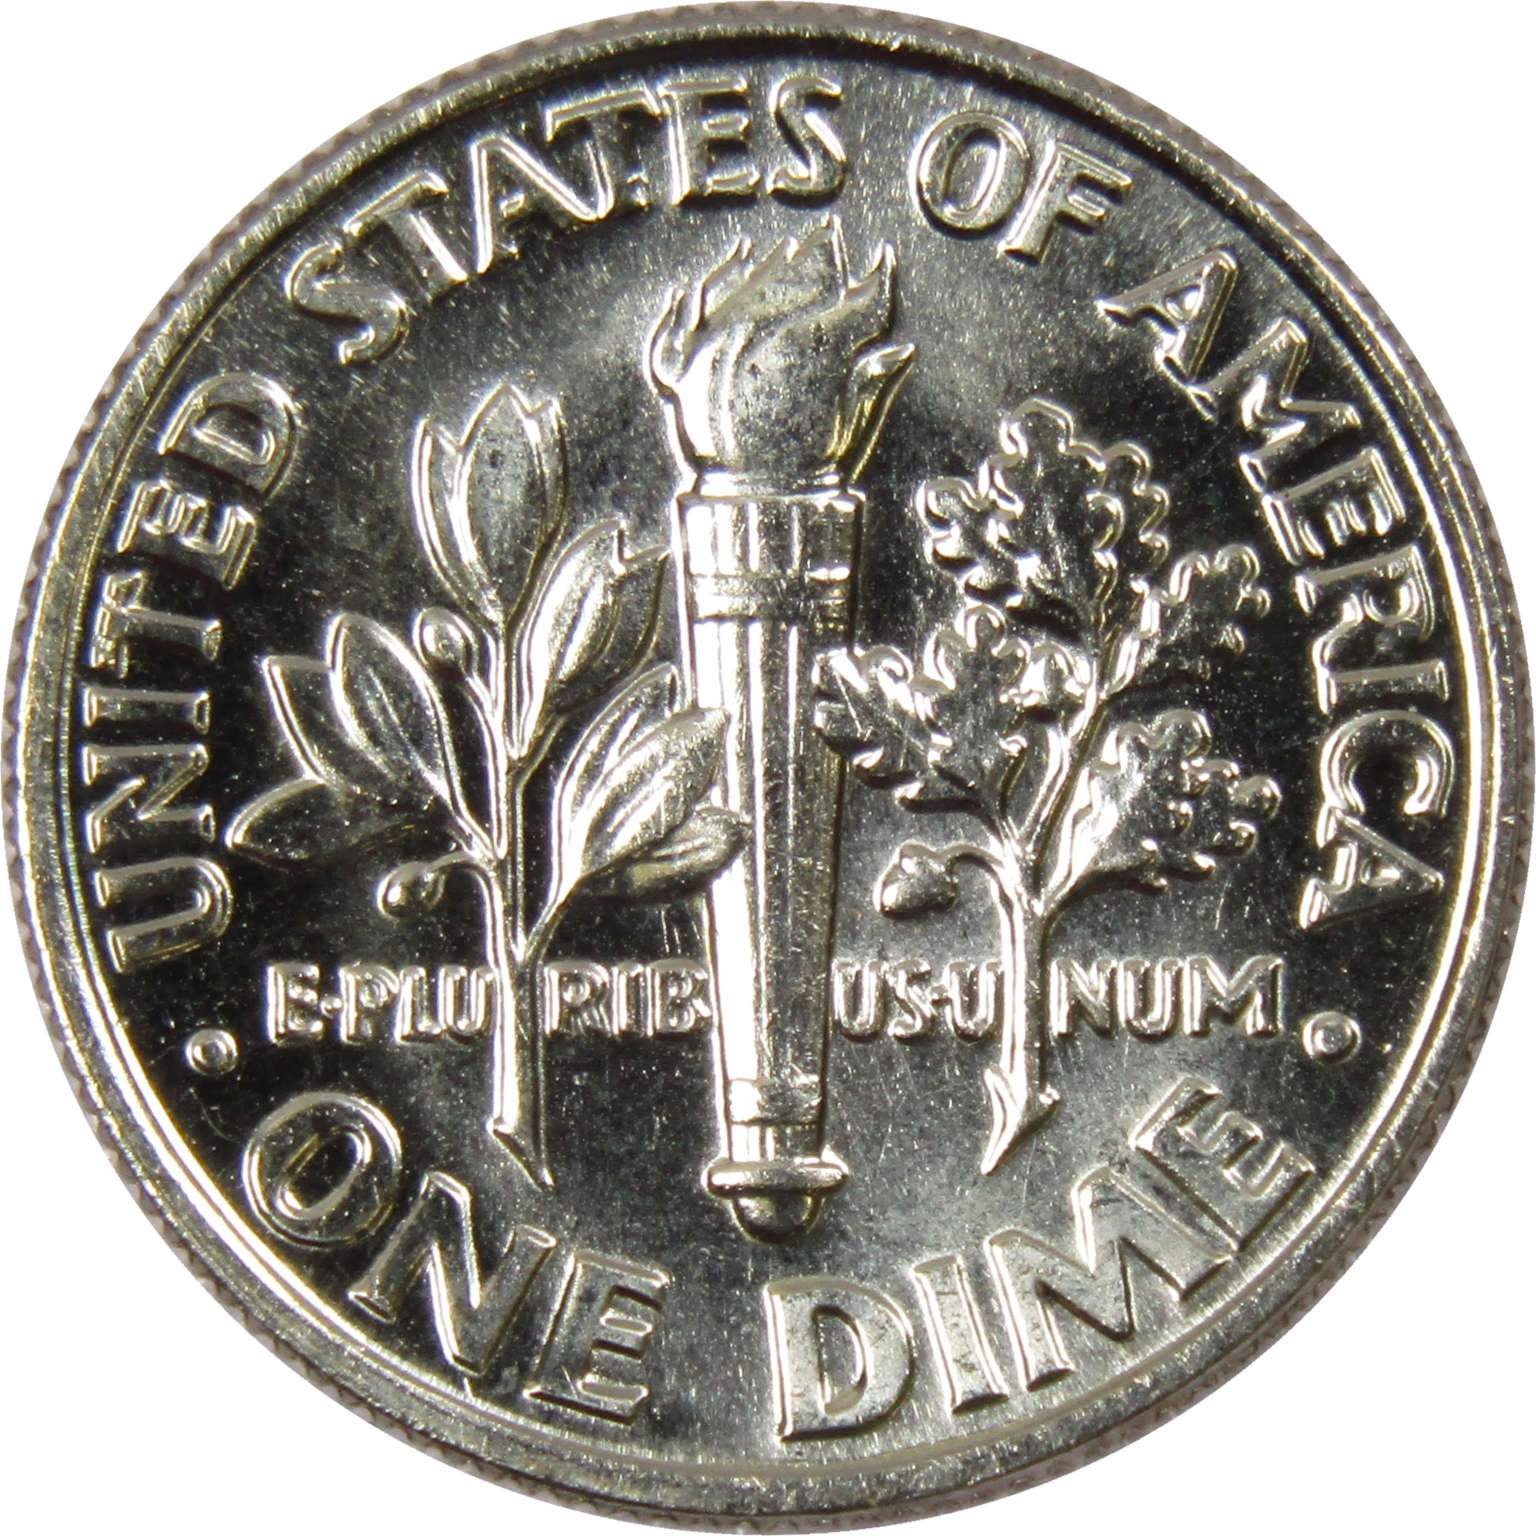 1991 D Roosevelt Dime BU Uncirculated Mint State 10c US Coin Collectible